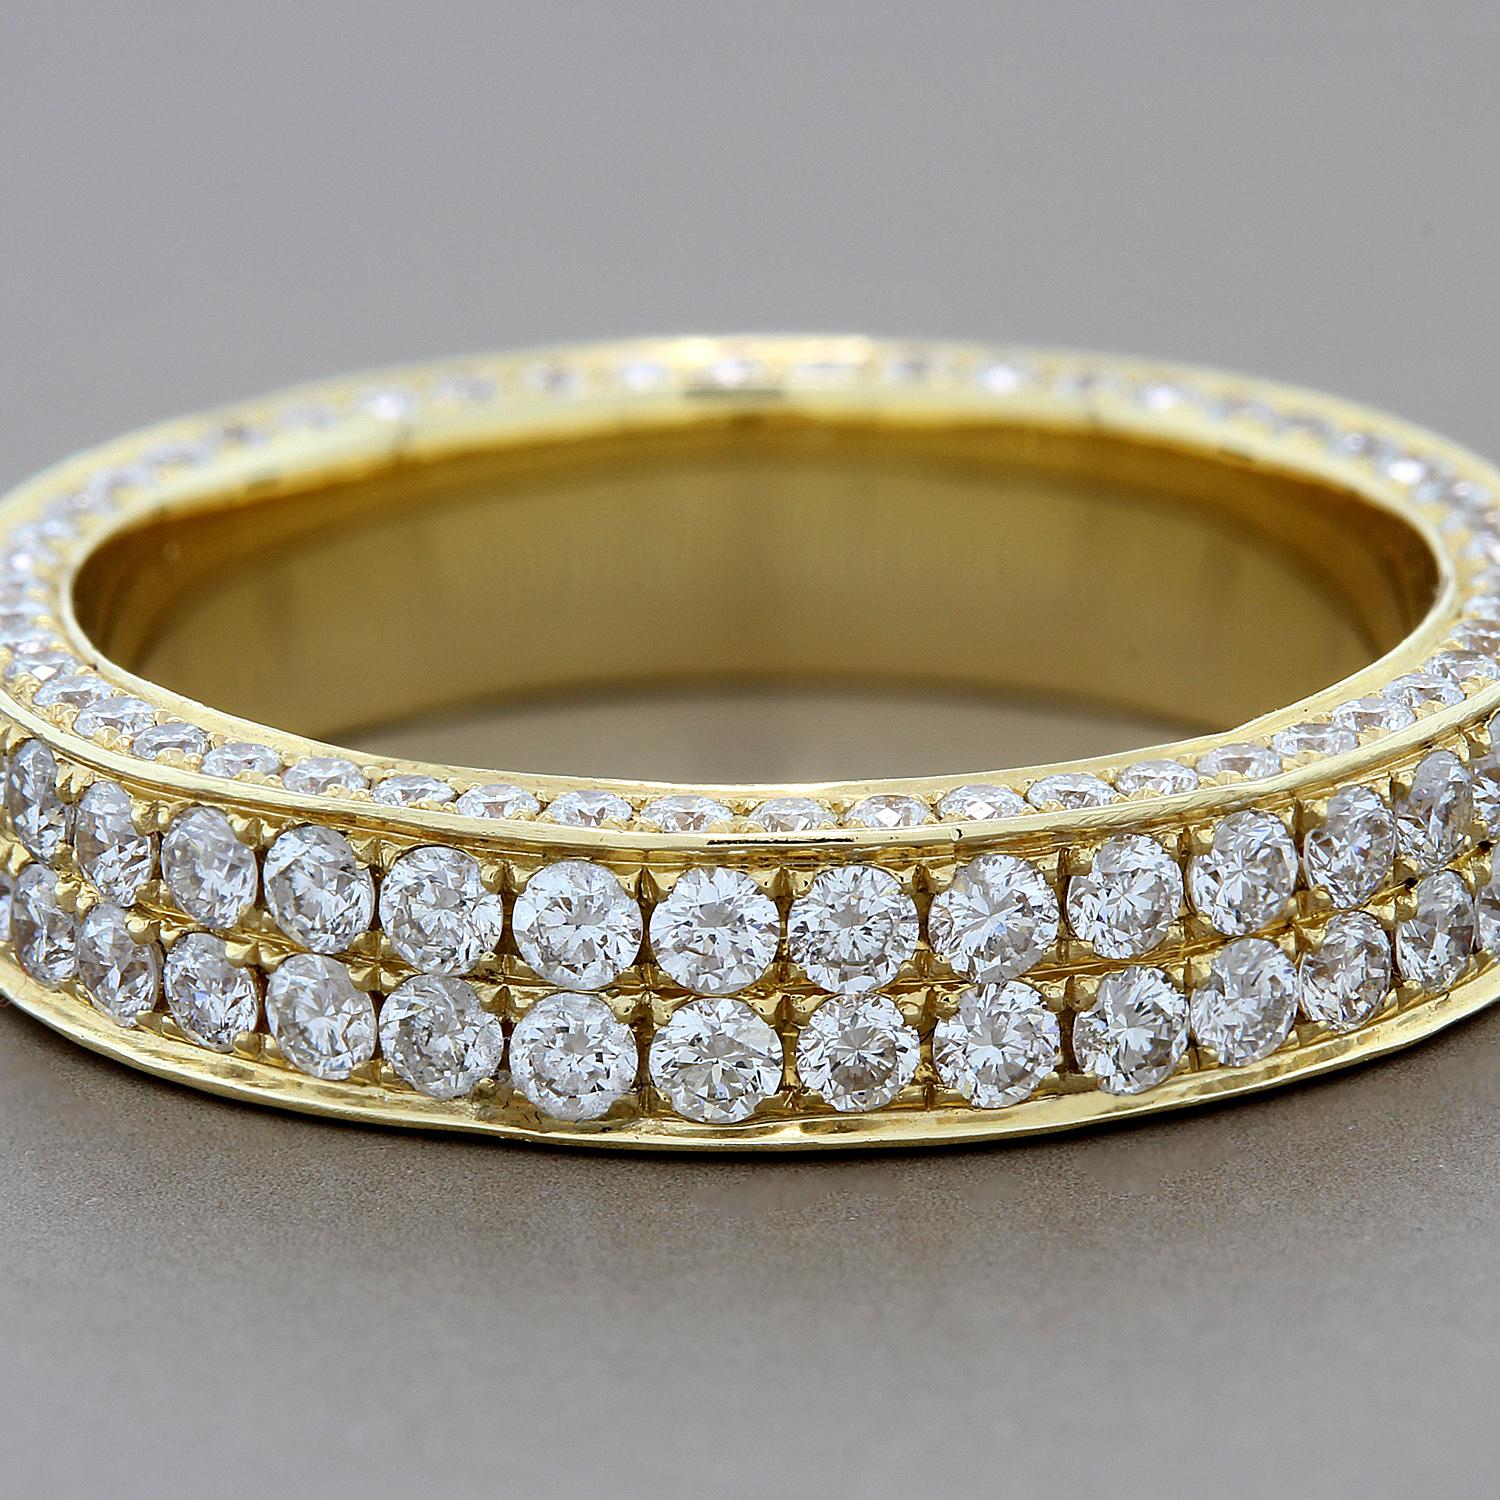 A full circle 1.96 carats of VVS quality round cut diamonds are pave set in this very special eternity band.  Pave diamonds are set on both the top of the band and on the insides.  A custom designed ring set in 14K yellow gold.

Currently ring size